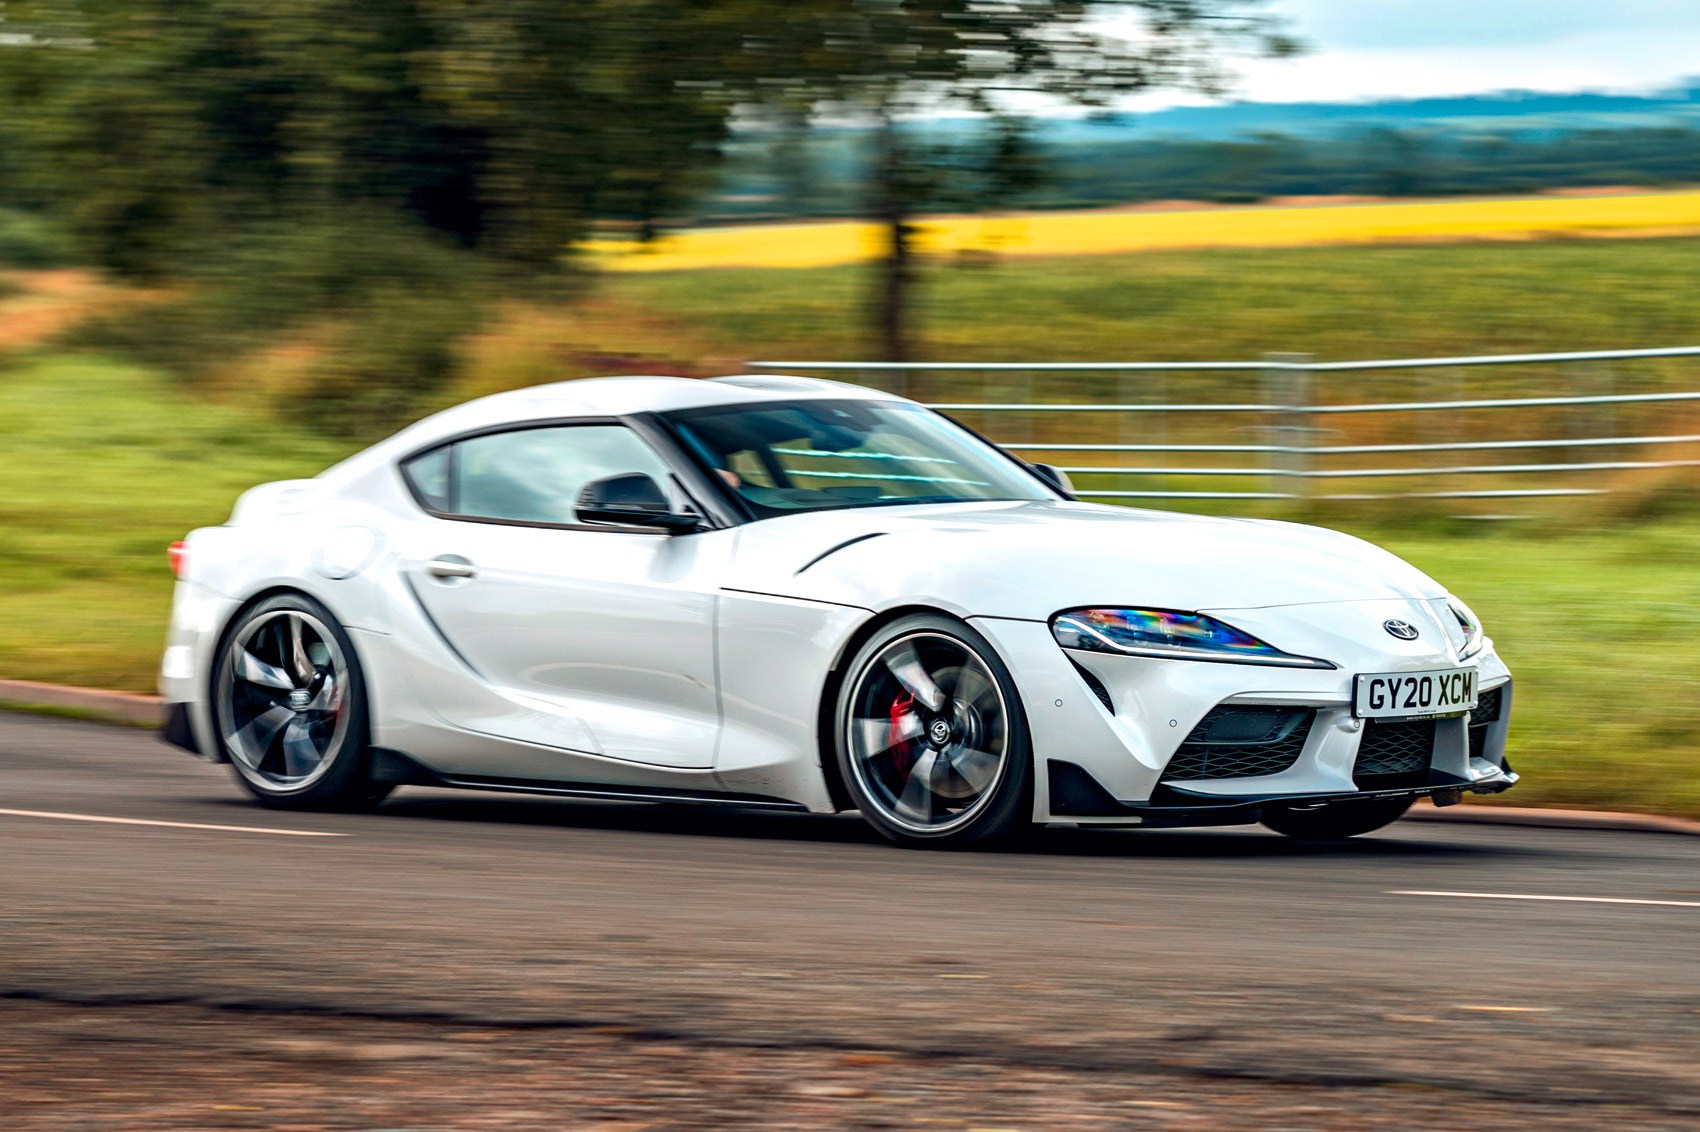 I Still Can't Bring Myself to Like the Toyota Supra